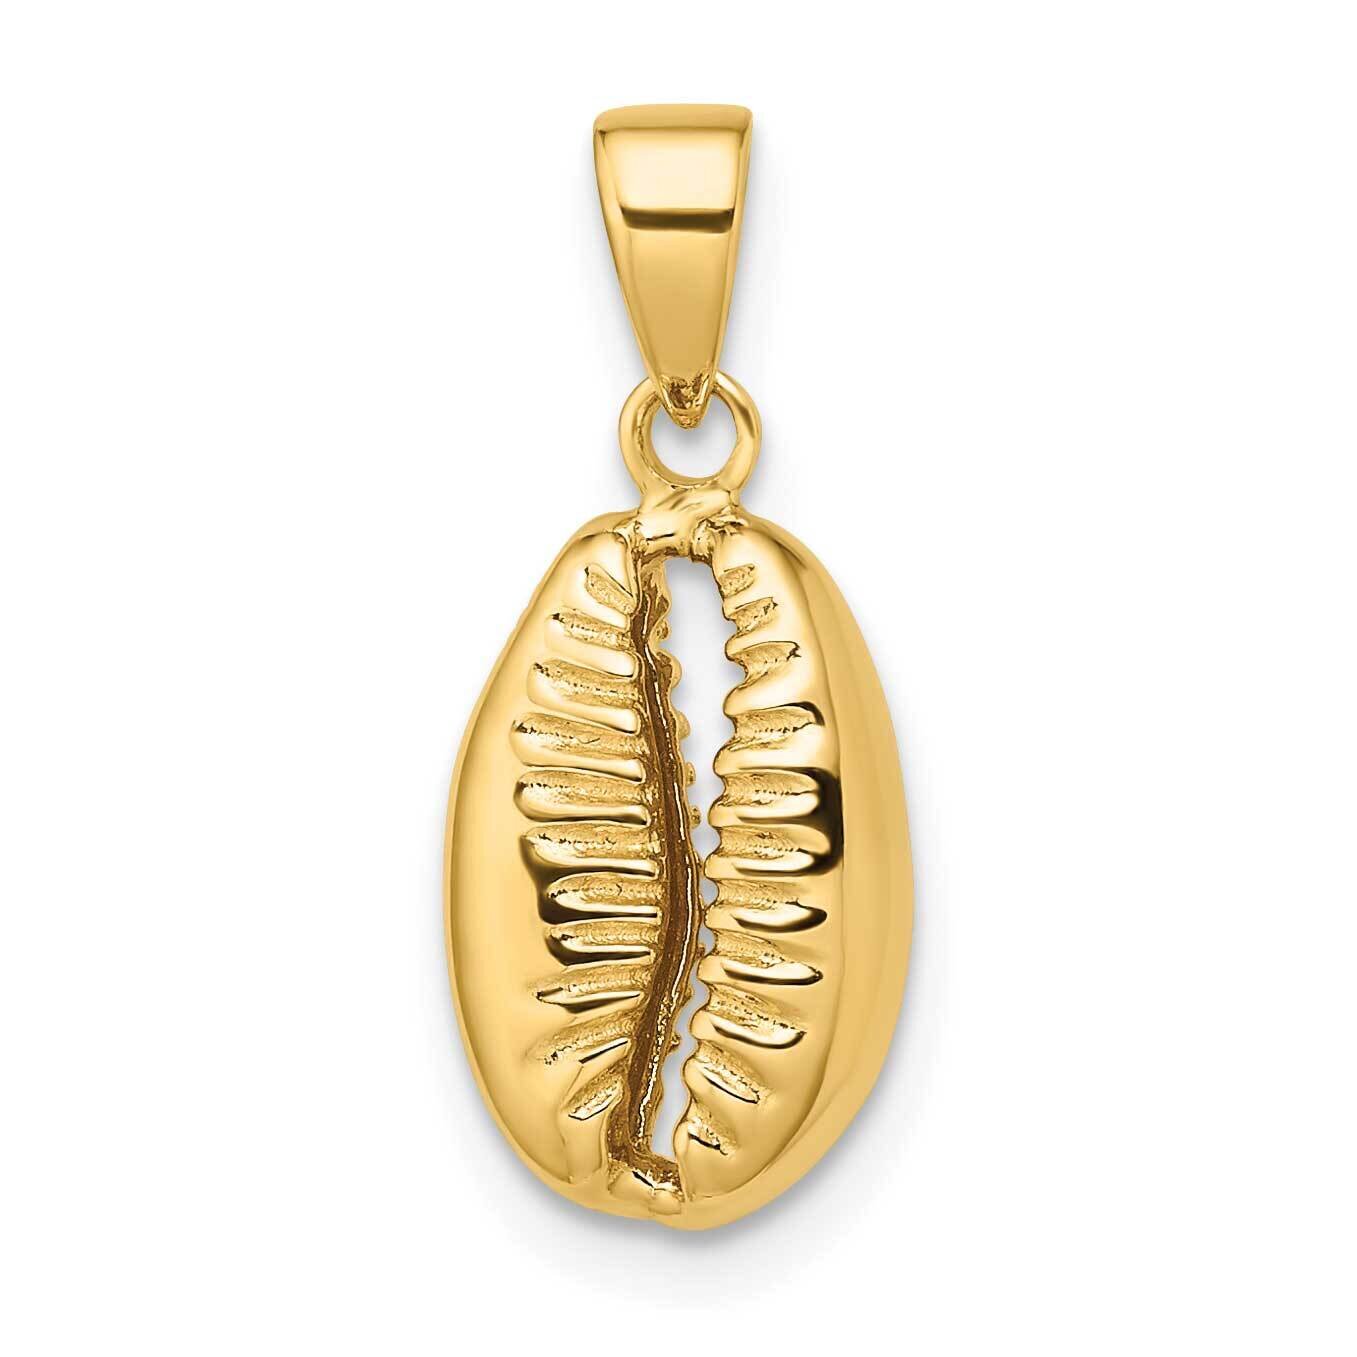 3D Crowrie Shell Pendant 14k Gold Polished K9947